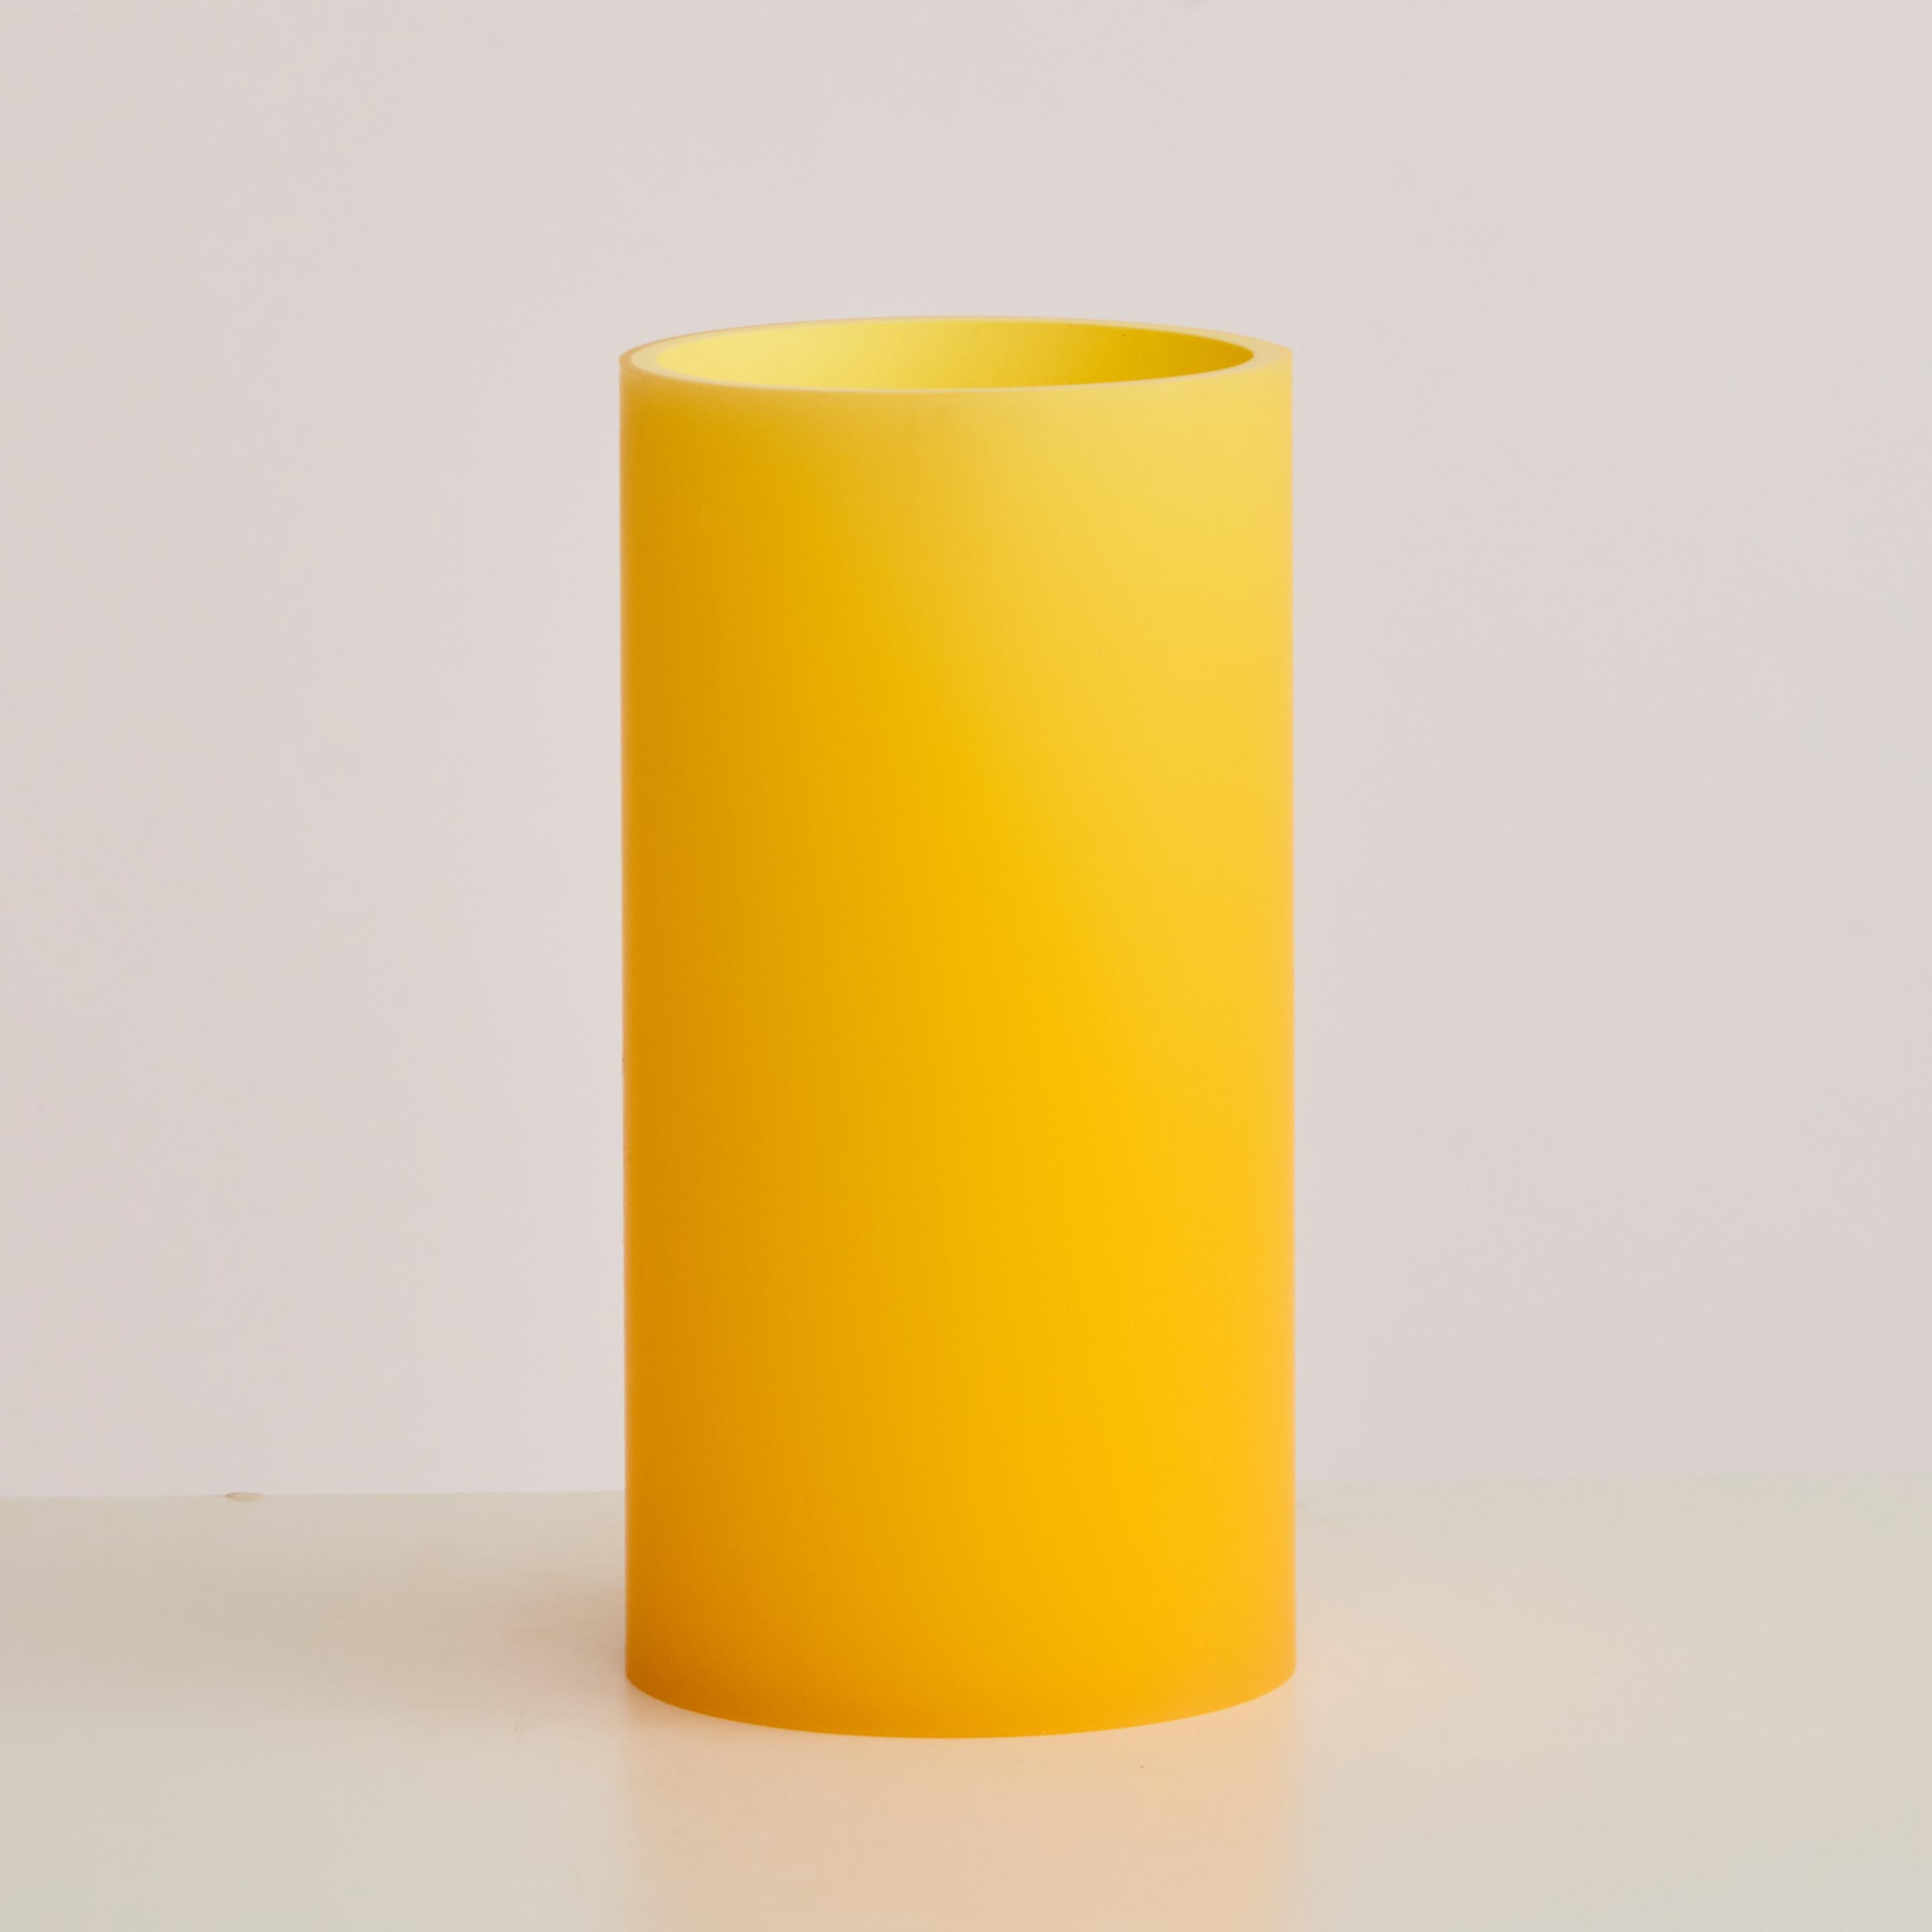 Cylinder Resin Vase in orange and yellow. Featuring a glowing exterior with colors melding in the peachy hue spectrum, from a pink interior underneath.

Item available for immediate delivery.